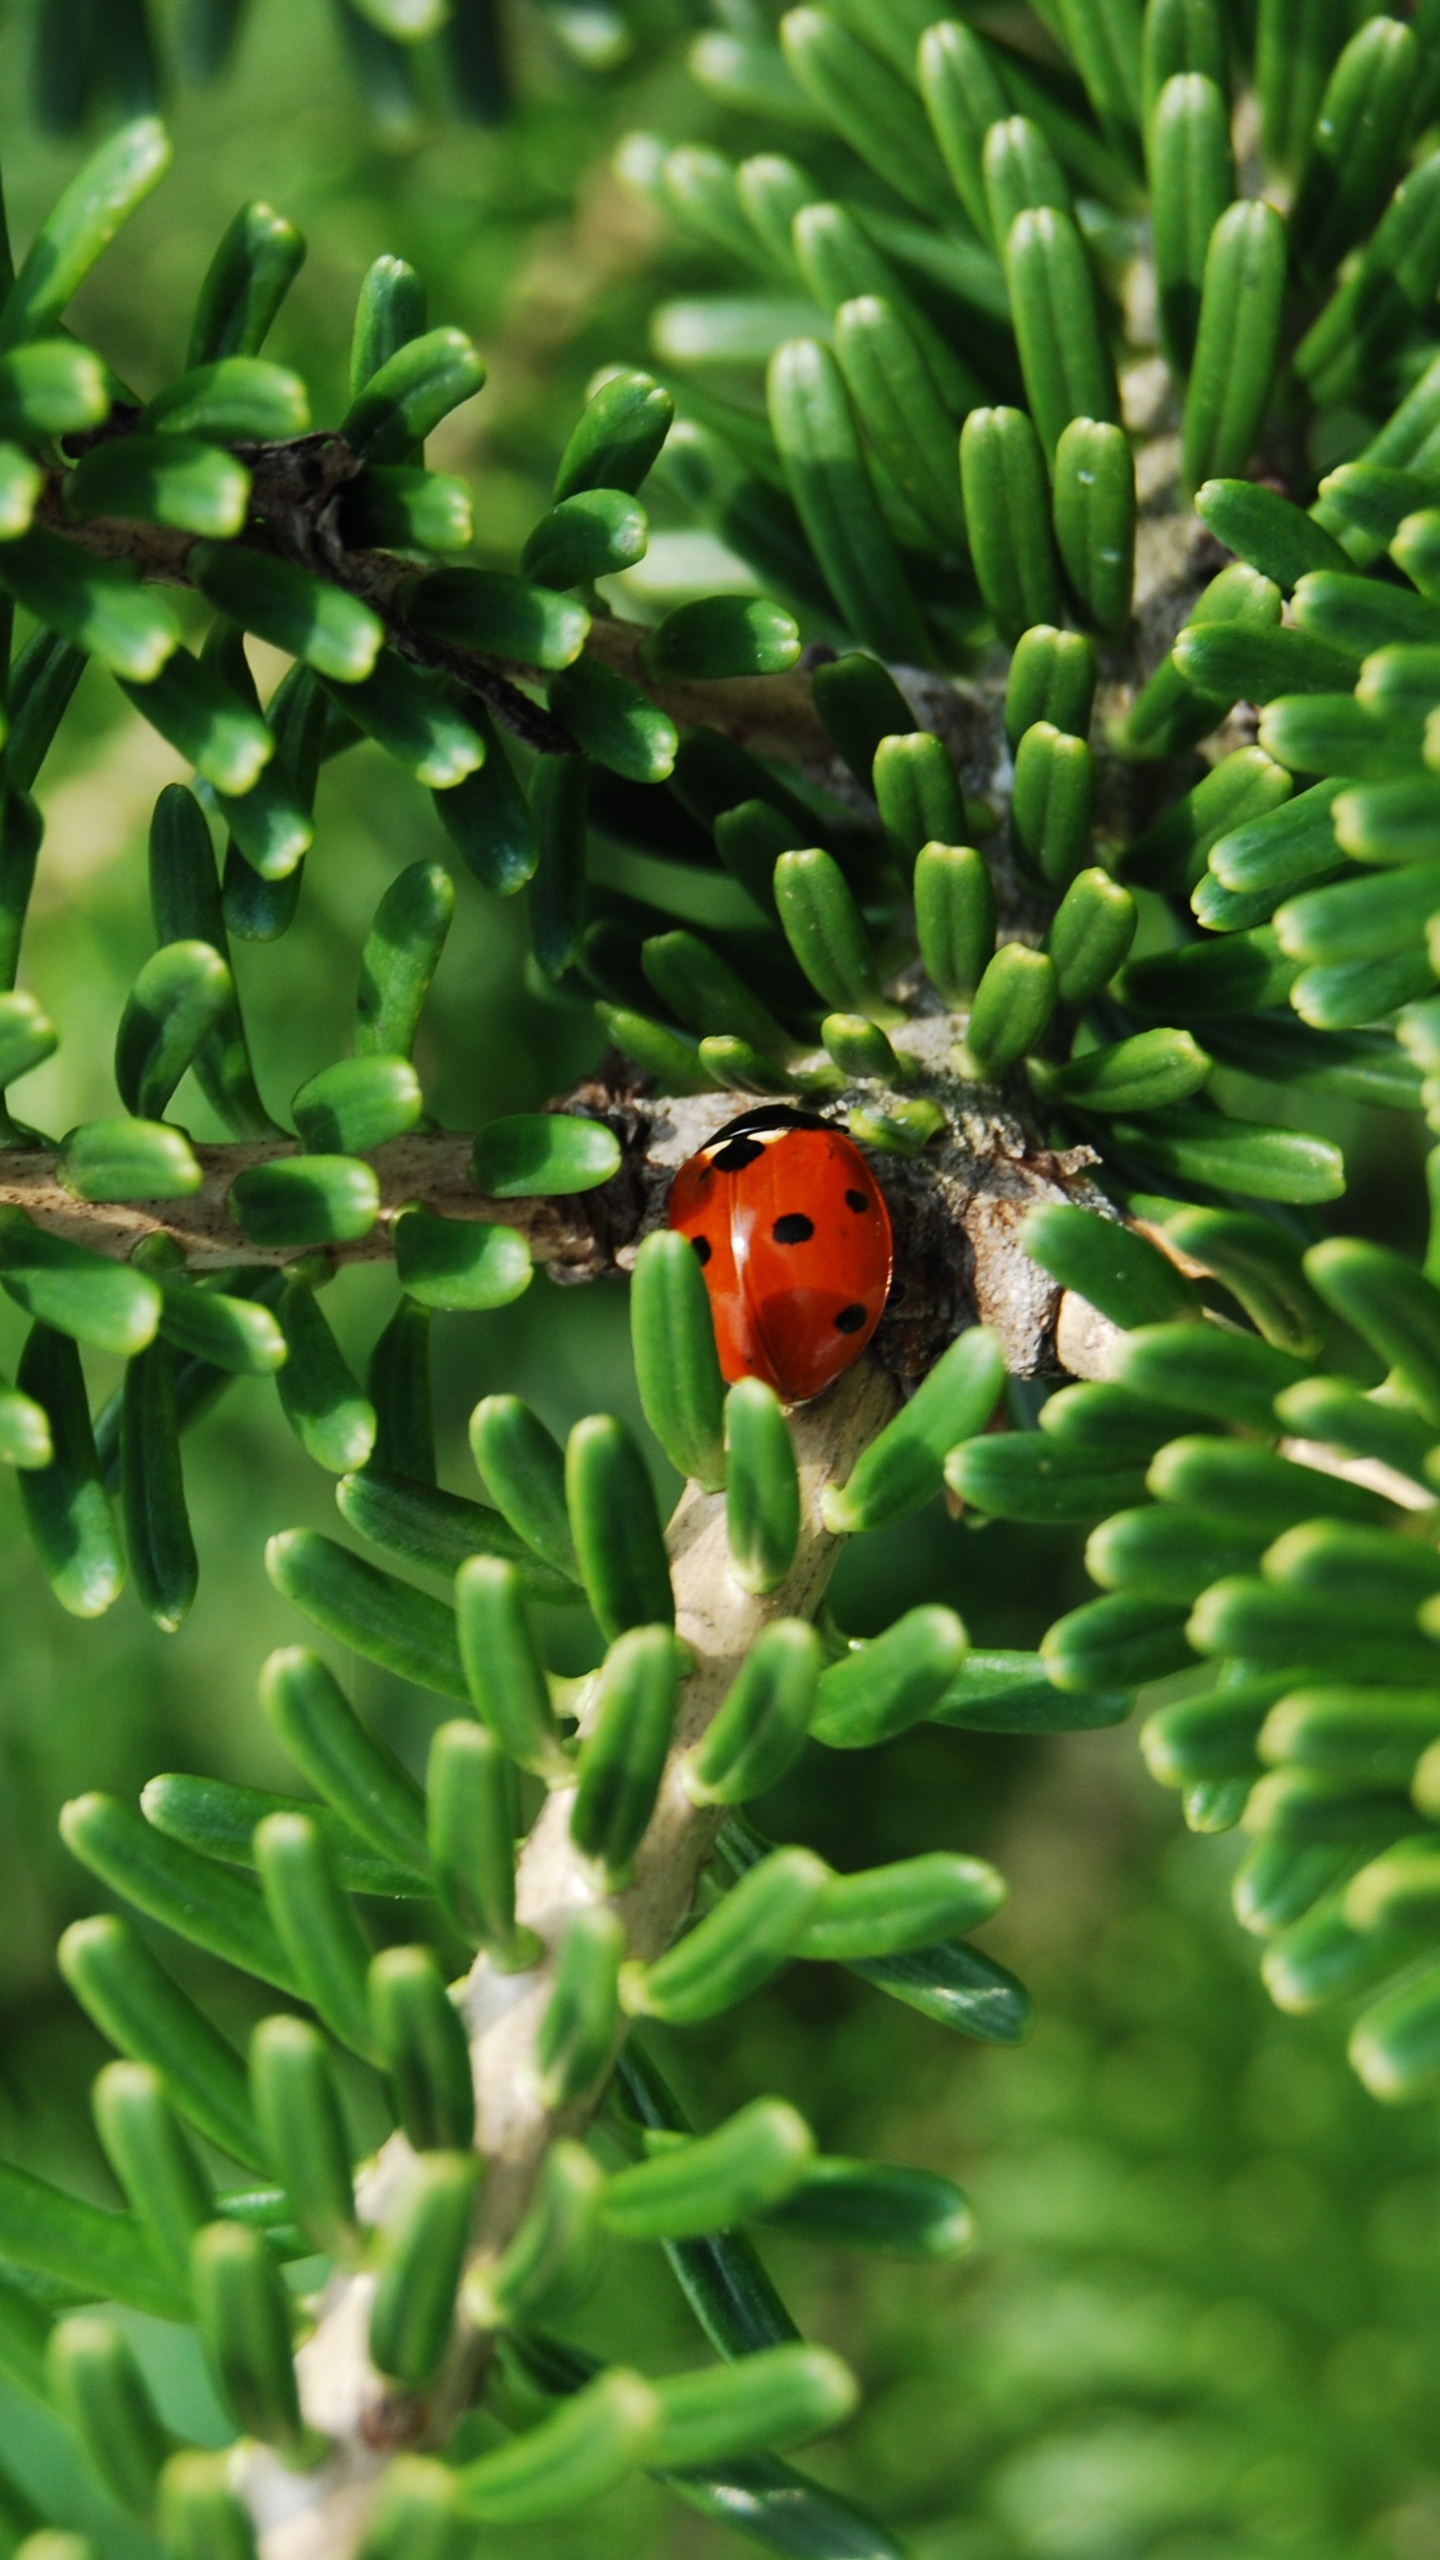 Red and Black Ladybug on Green Plant During Daytime. Wallpaper in 1440x2560 Resolution